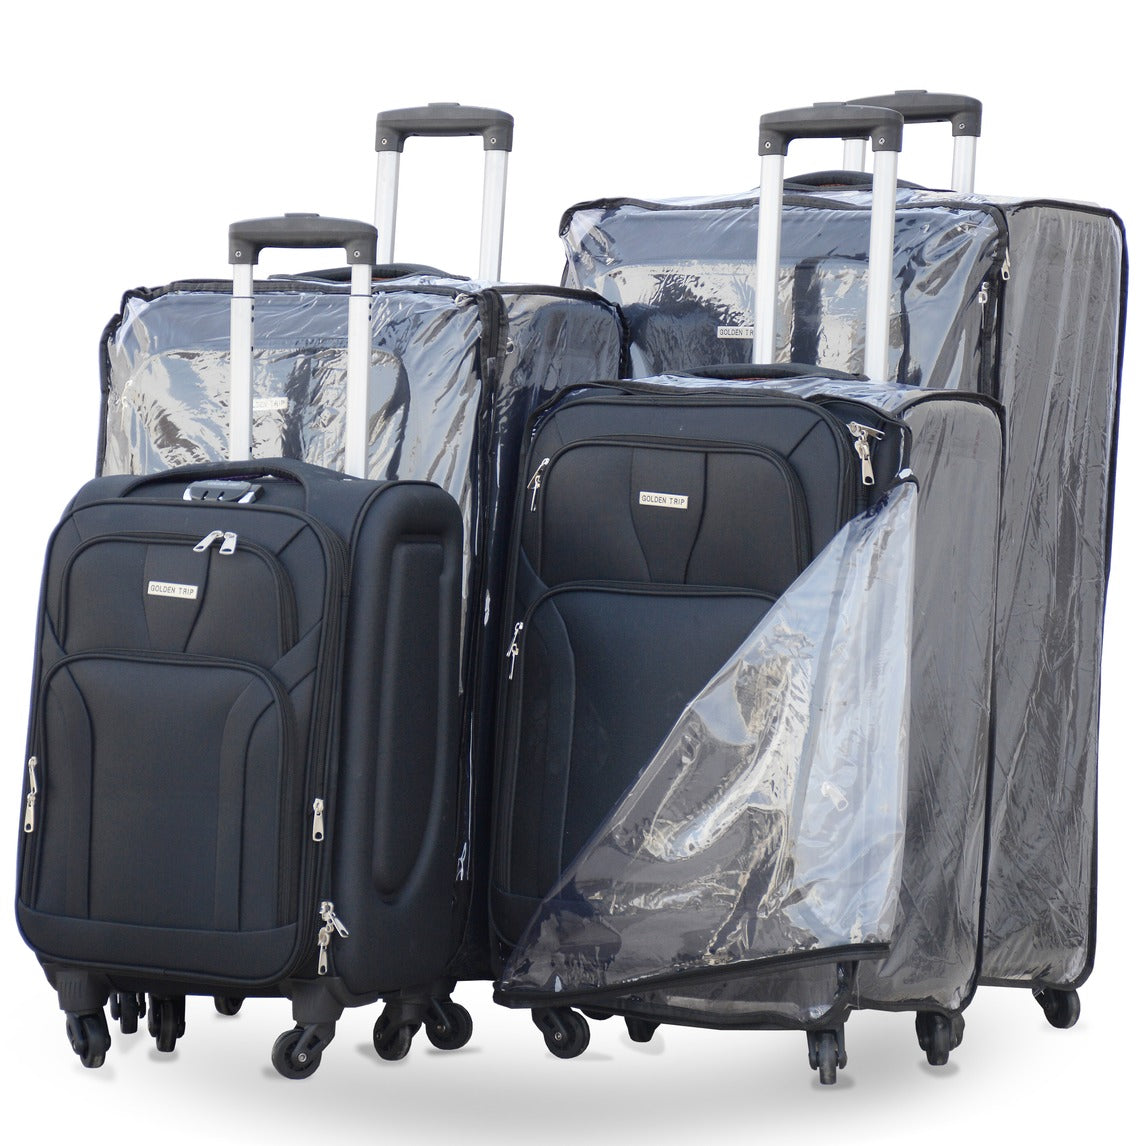 4 Piece Set Soft Material 4 Wheel Premium Luggage Bag with Full Cover C1